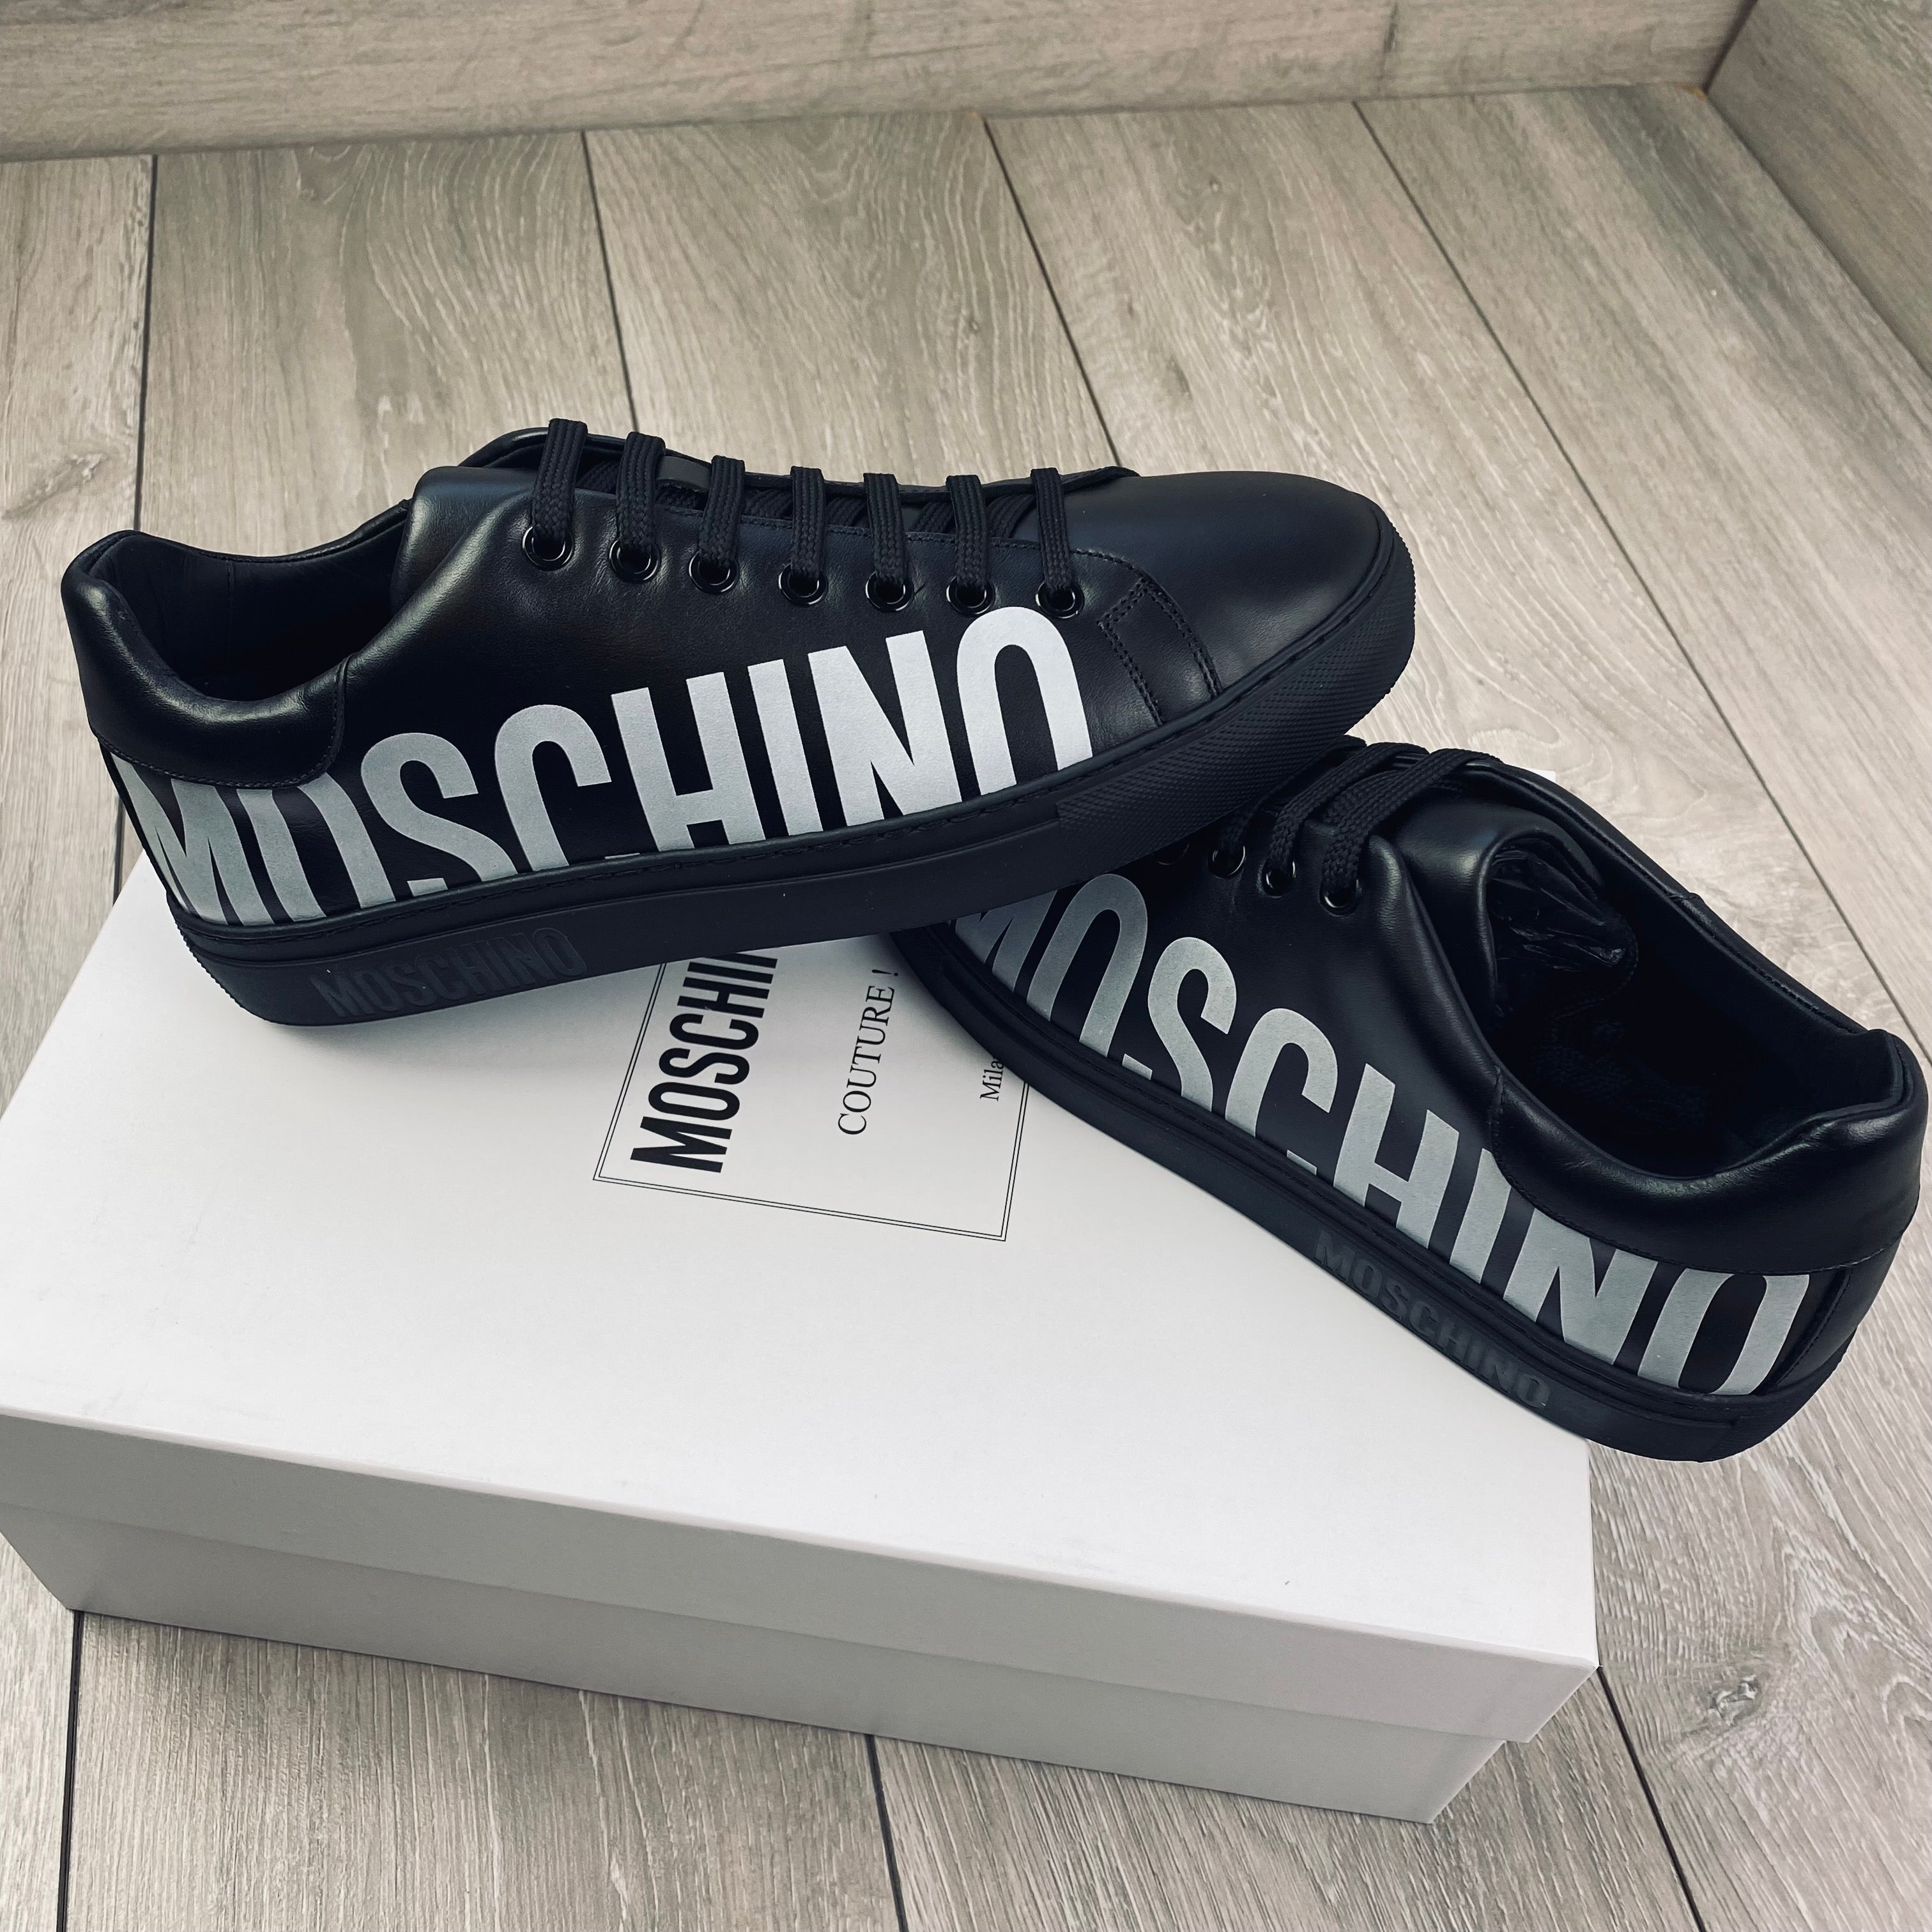 Moschino Leather Sneakers